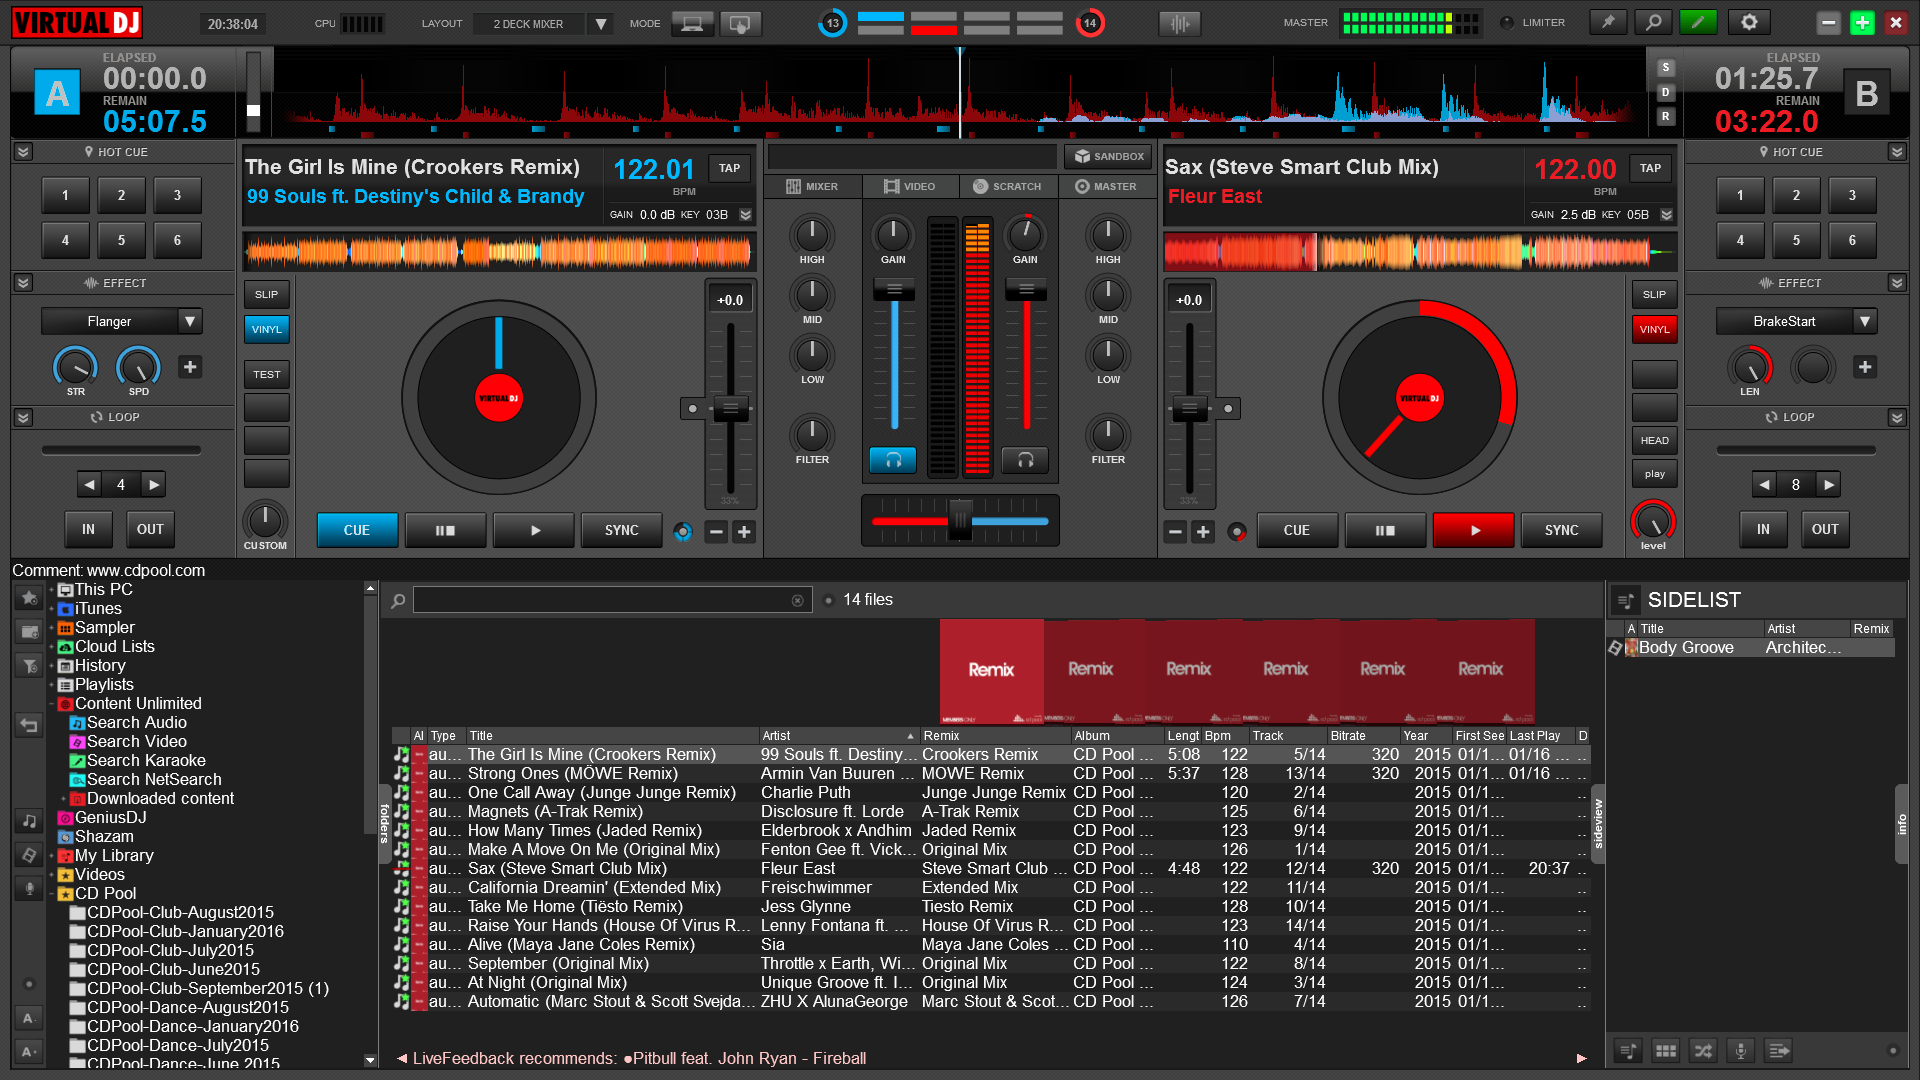 How To Download Addons For Virtual Dj